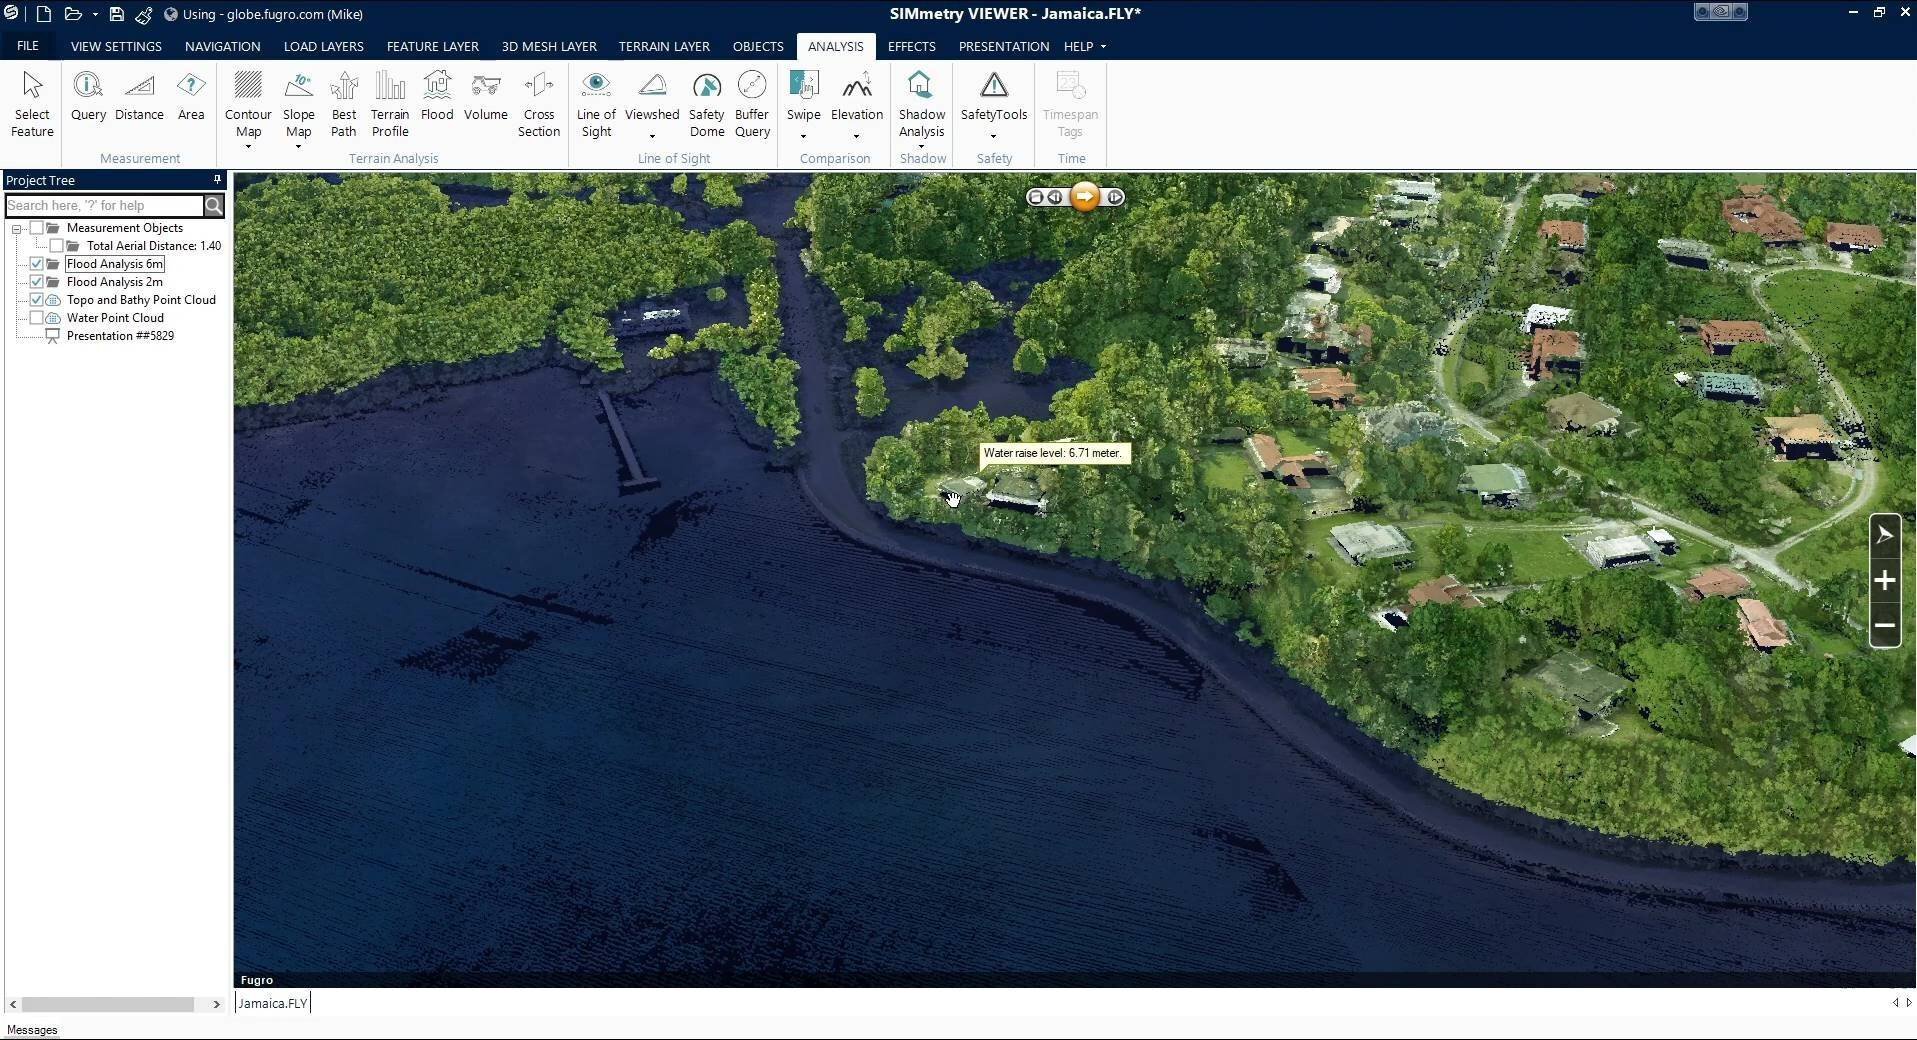 Fugro SIMmetry� GIS tool showing the simulated flood effects of sea level rise.
A coastal mapping project in Jamaica and Haiti to support The Investment Plan for the Caribbean Regional Track of the Pilot Program for Climate Resilience.